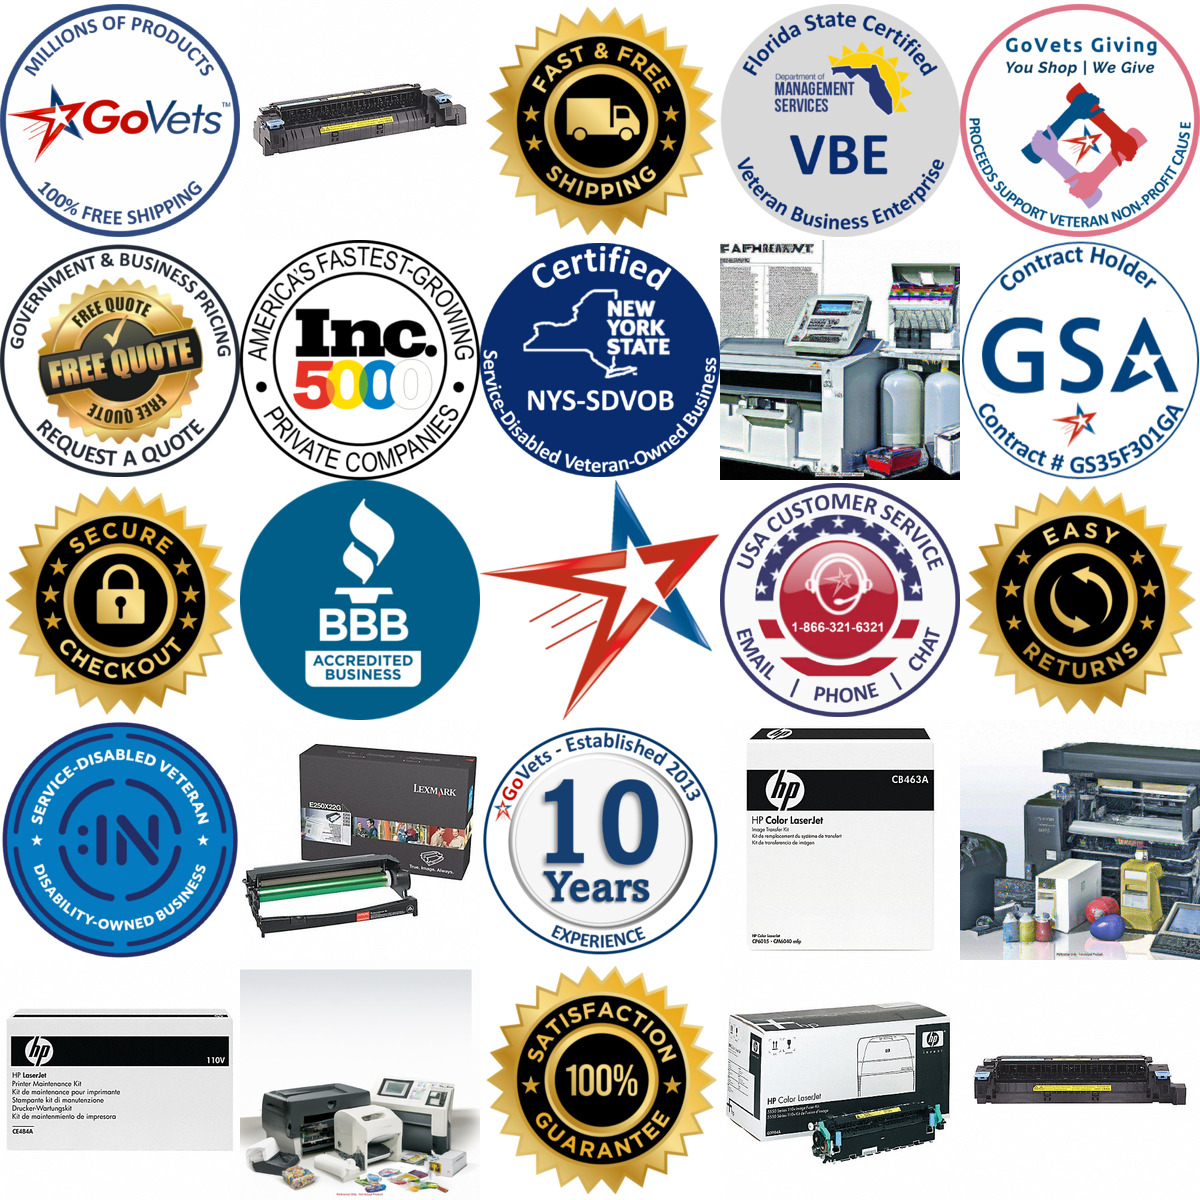 A selection of Printer Maintenance Kits and Supplies products on GoVets